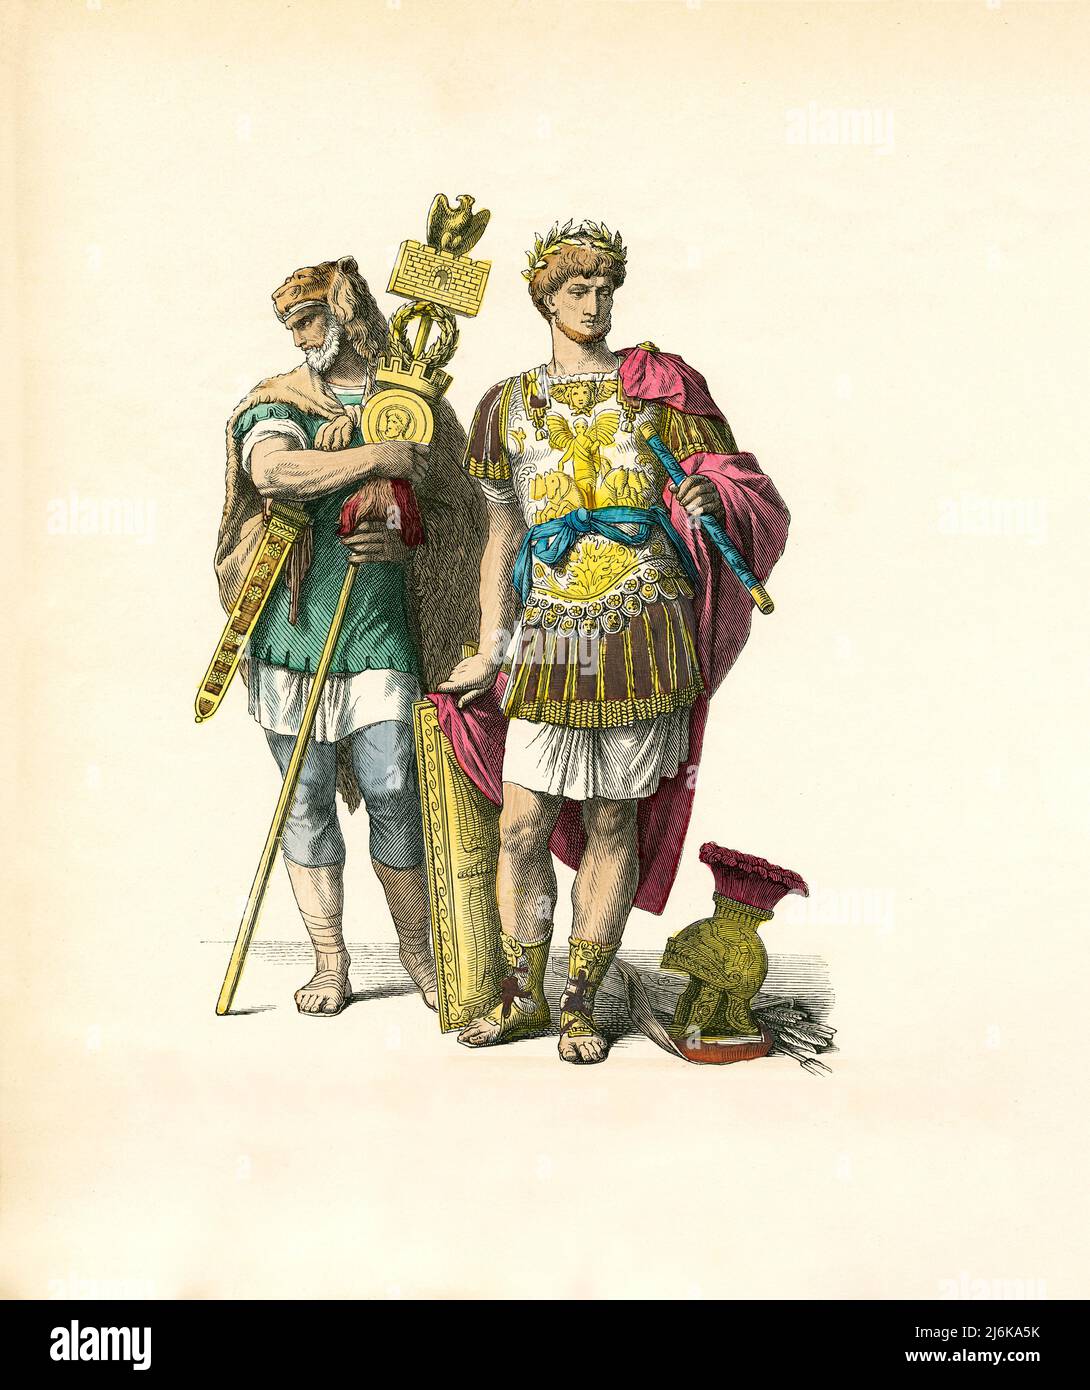 Standard Bearer and Roman General, Ancient Rome, Illustration, The ...